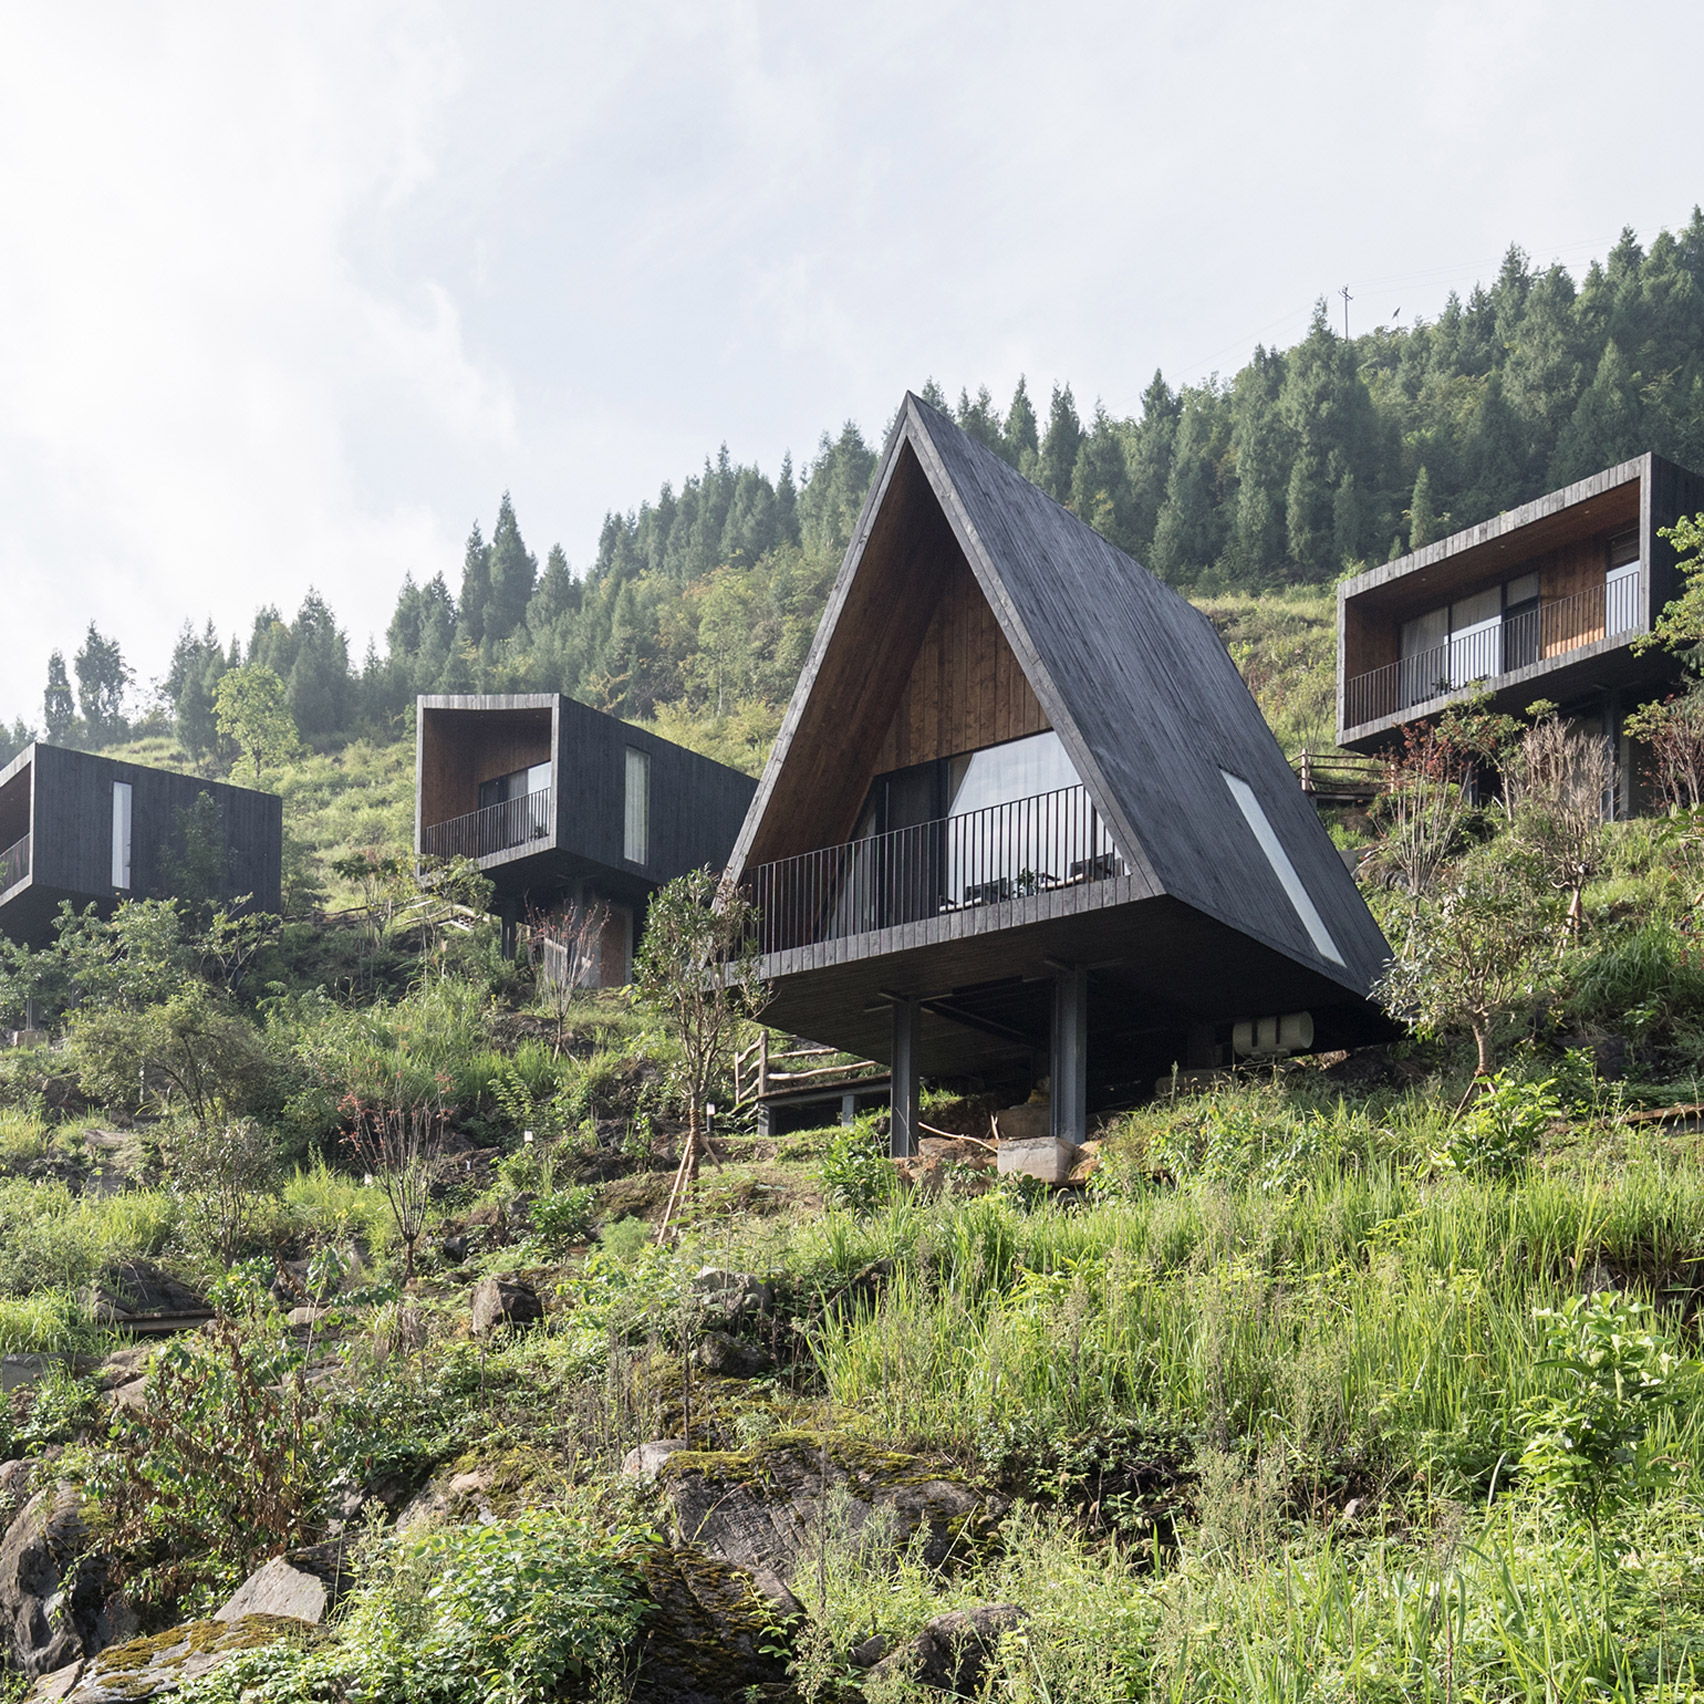 Zjjz Atelier Scatters 10 Cabins Across Mountain In Rural China